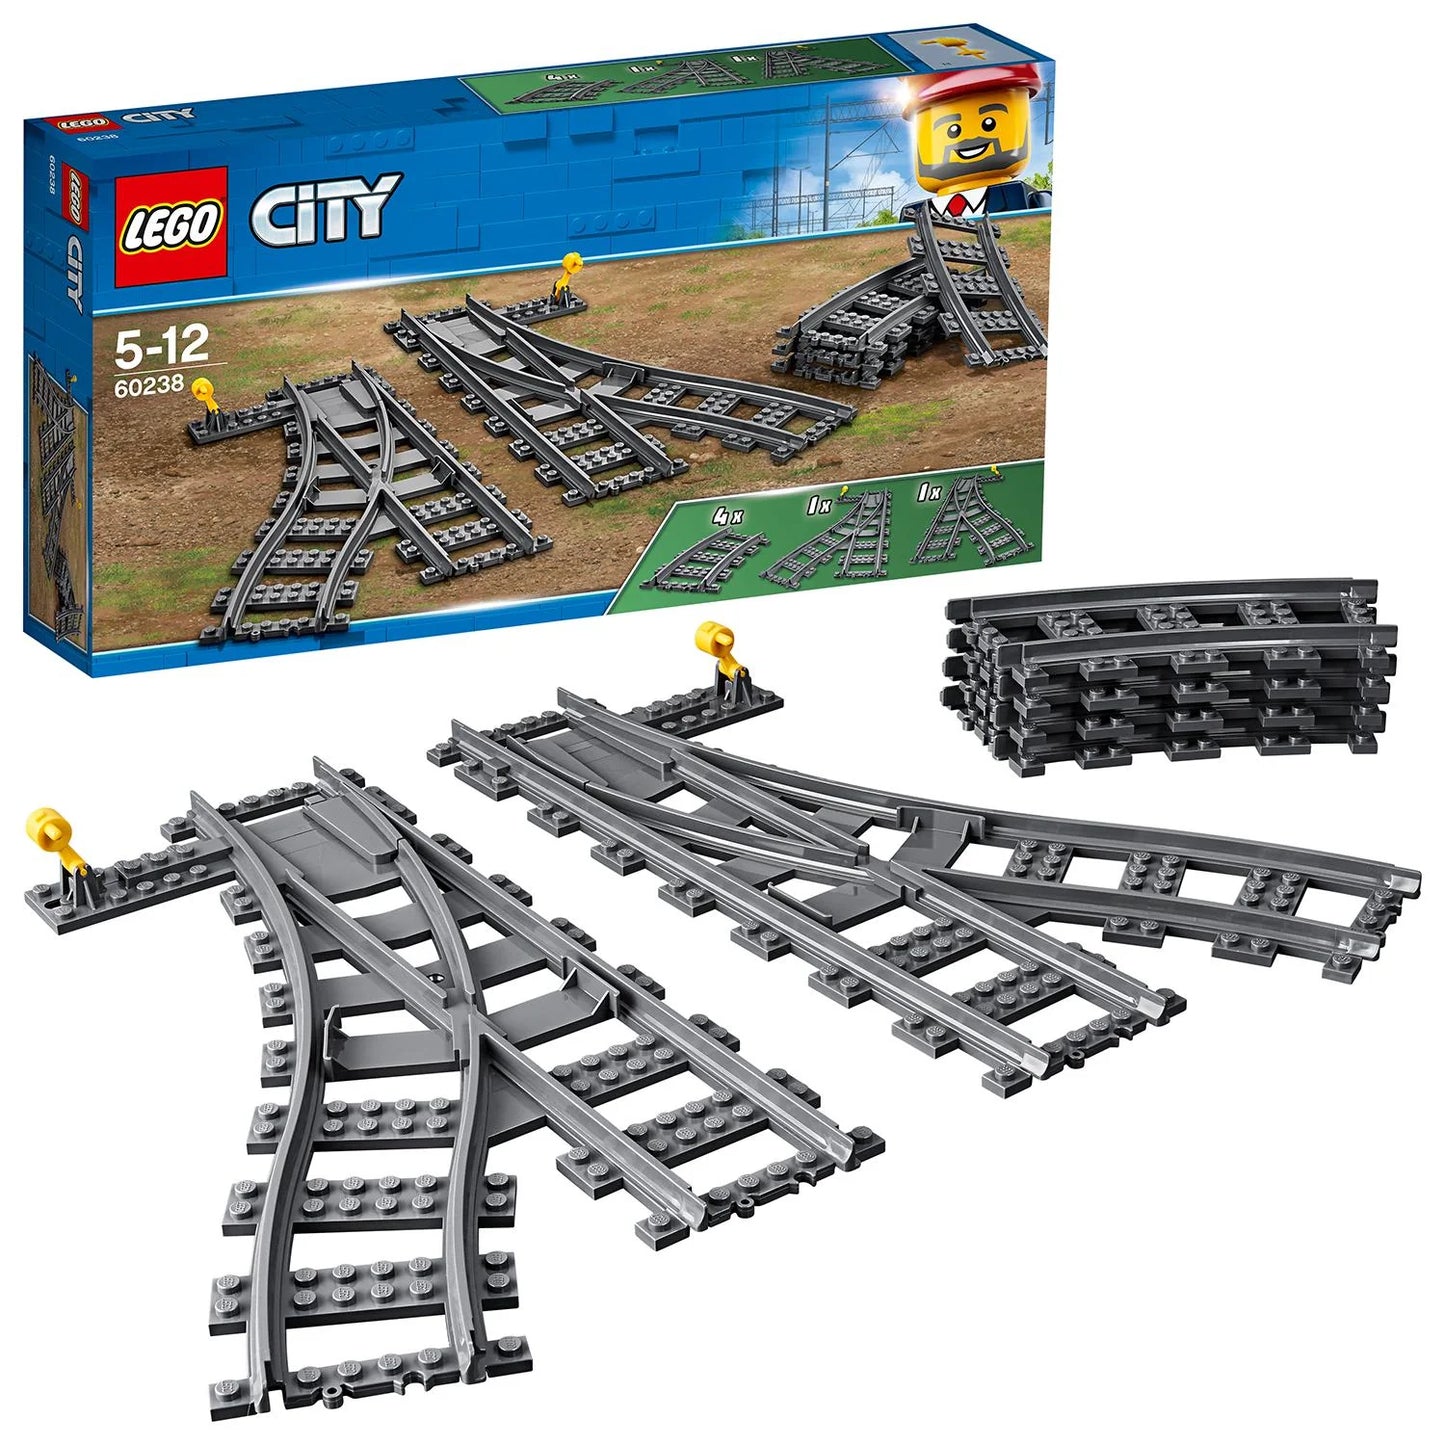 Substitutes (new for 7895) - LEGO City